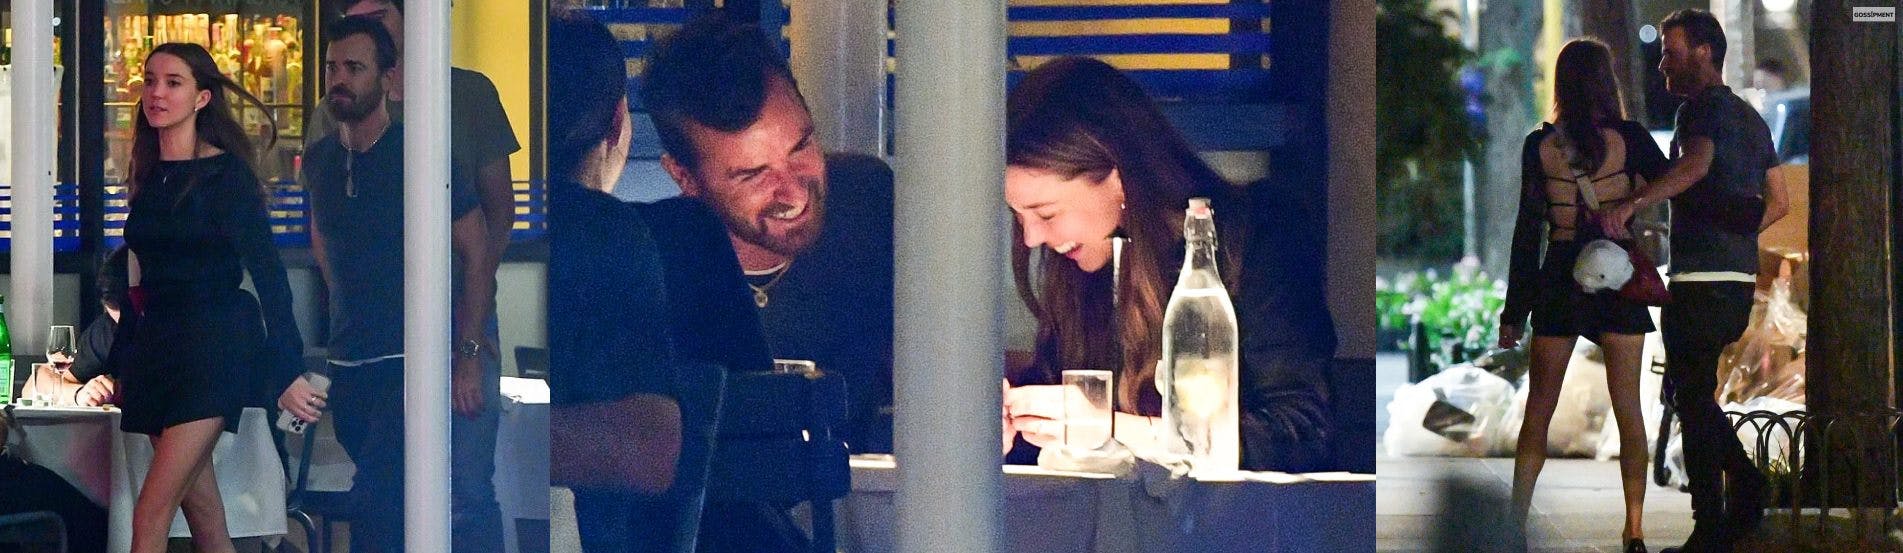 Cover Image for Justin Theroux Breaks Celibacy On Flirty Night Out With Actress Nicole Brydon Bloom Since Jennifer Aniston Divorce